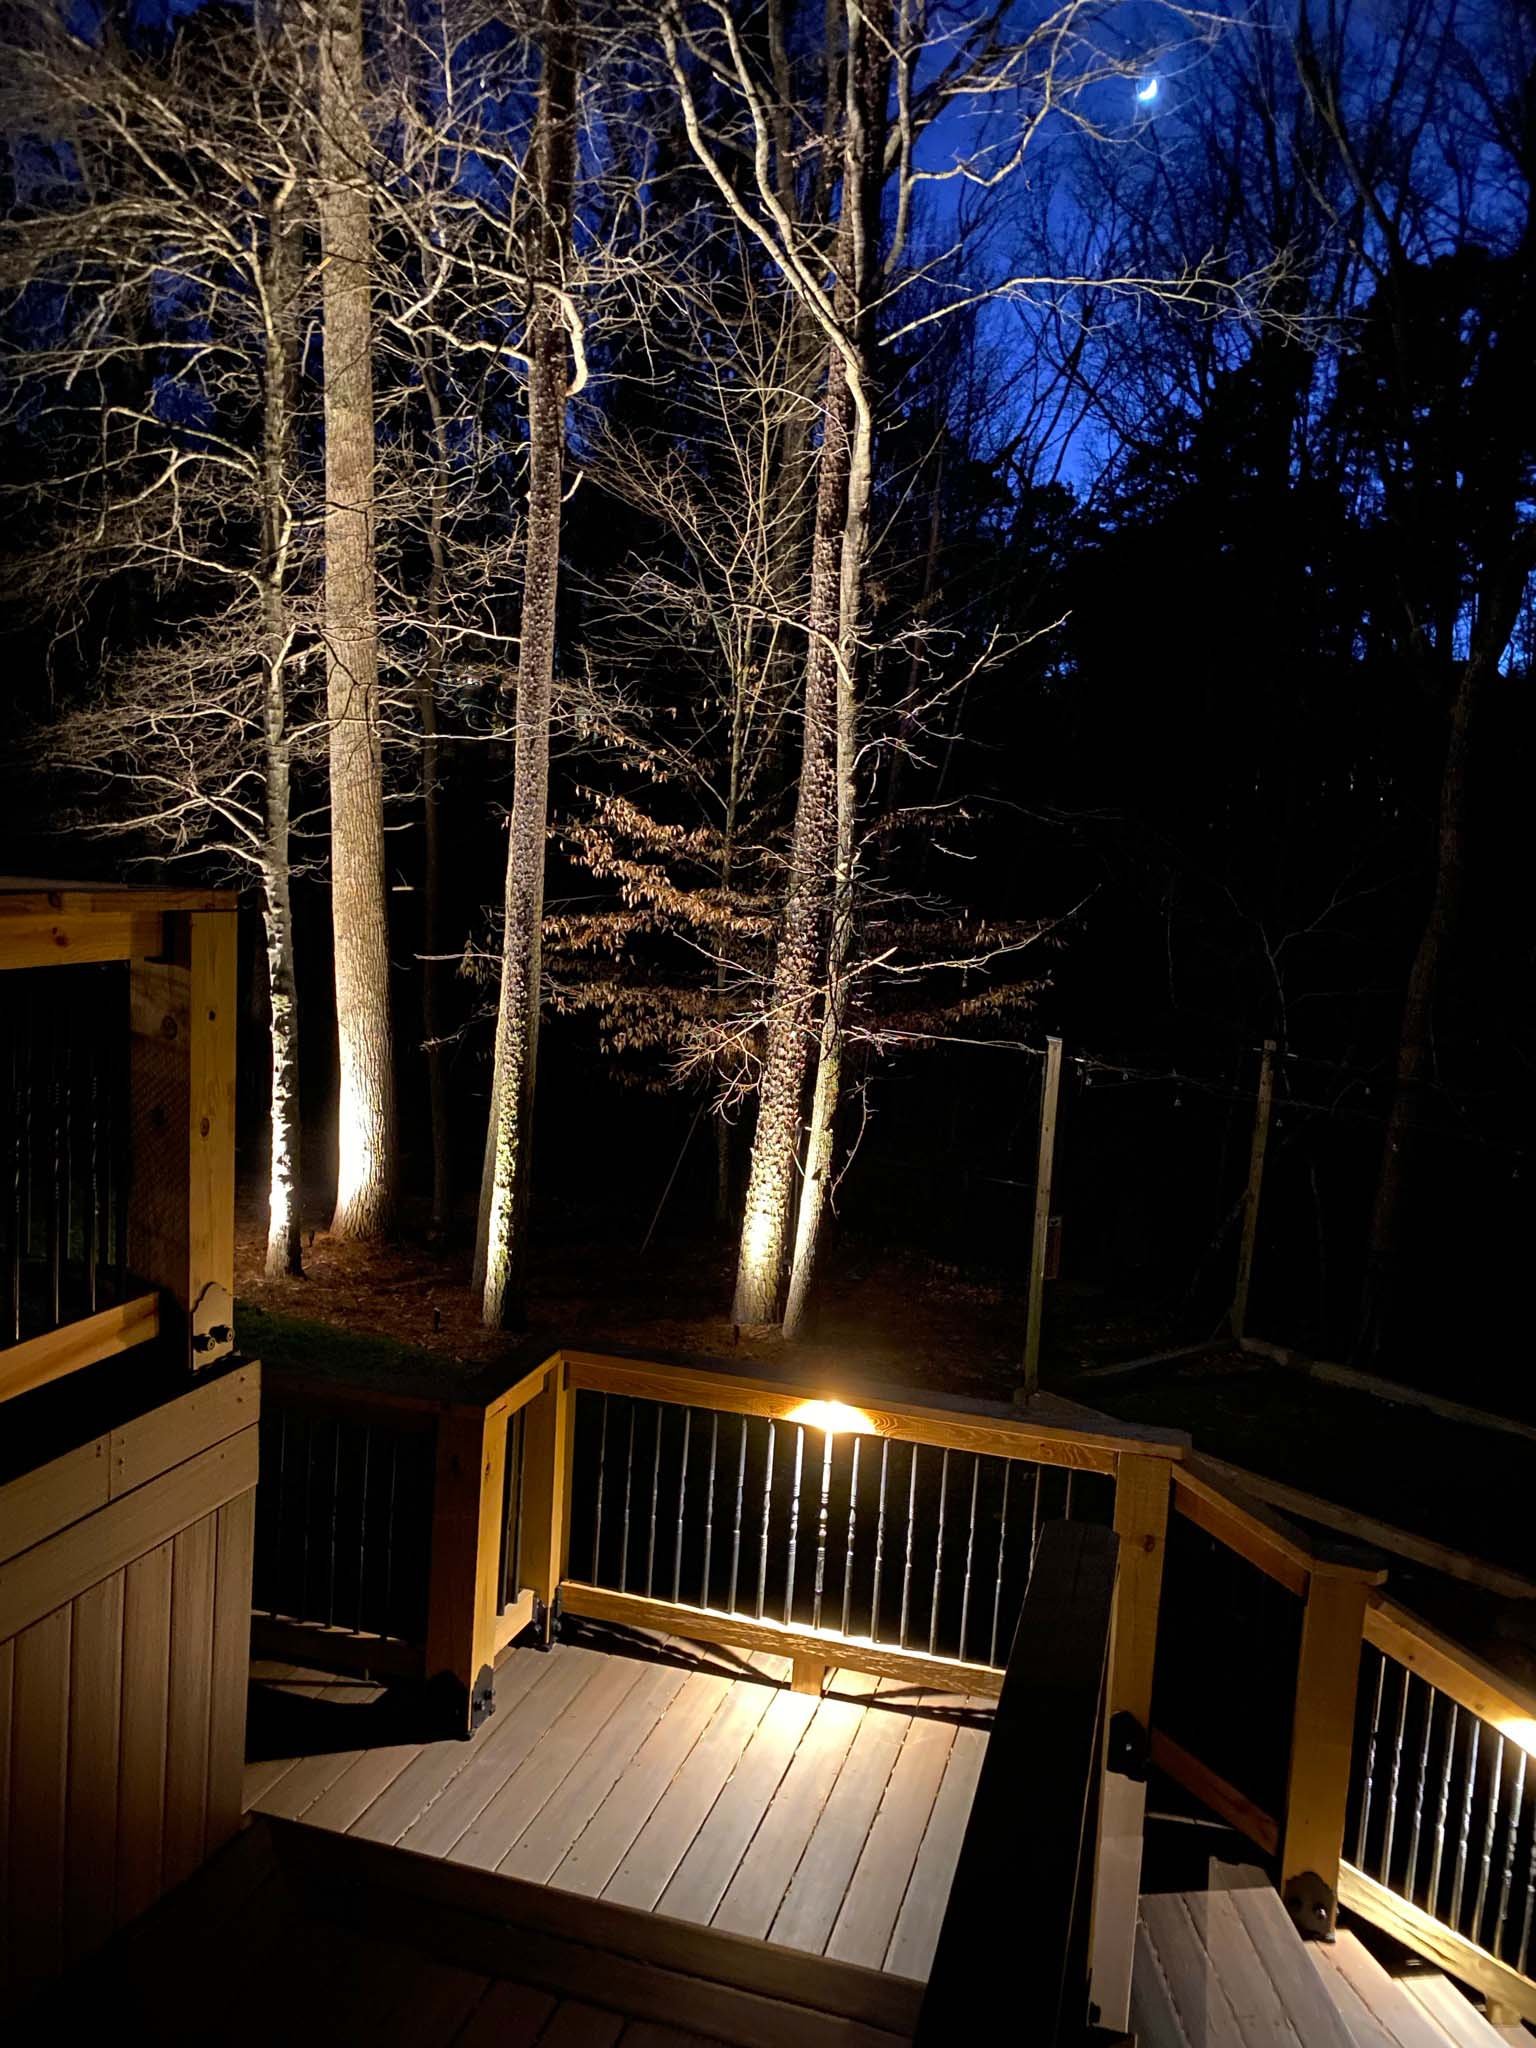  Large winter trees illuminated with outdoor accent lights behind a multilevel deck illuminated with lights mounted to the railings.  